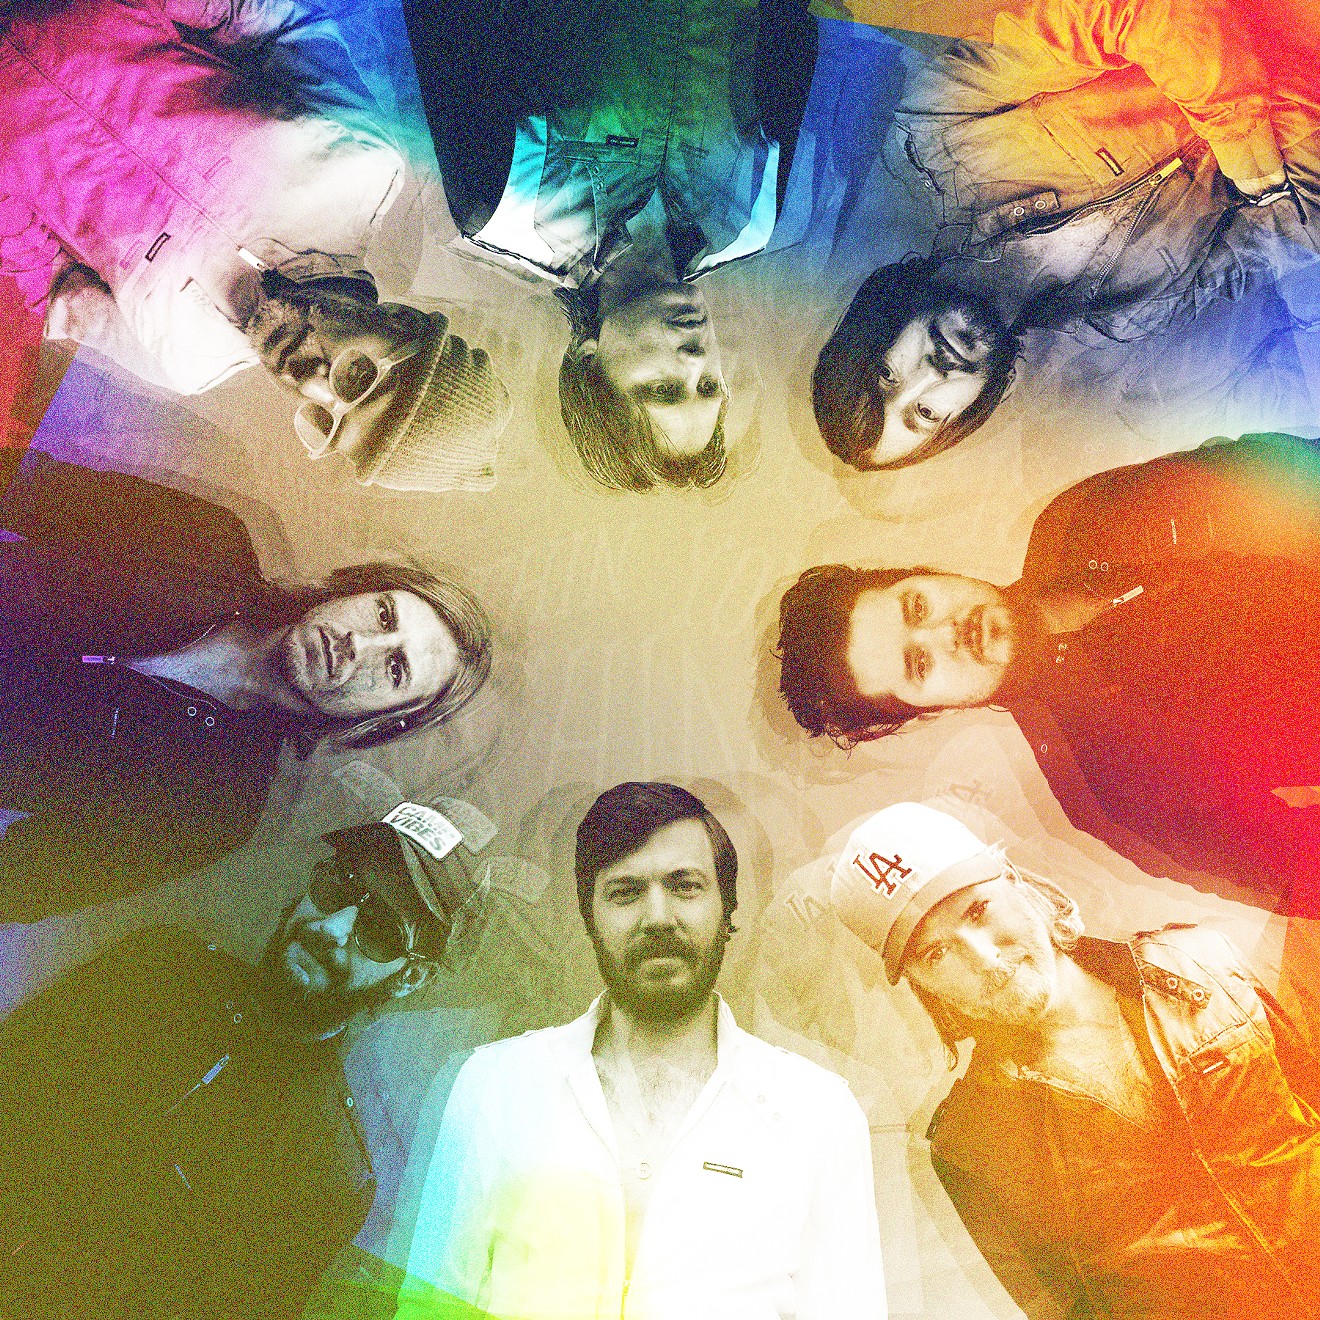 BNQT, based in Denton, comprises members of Midlake, Band of Horses, Franz Ferdinand, Grandaddy and Travis.